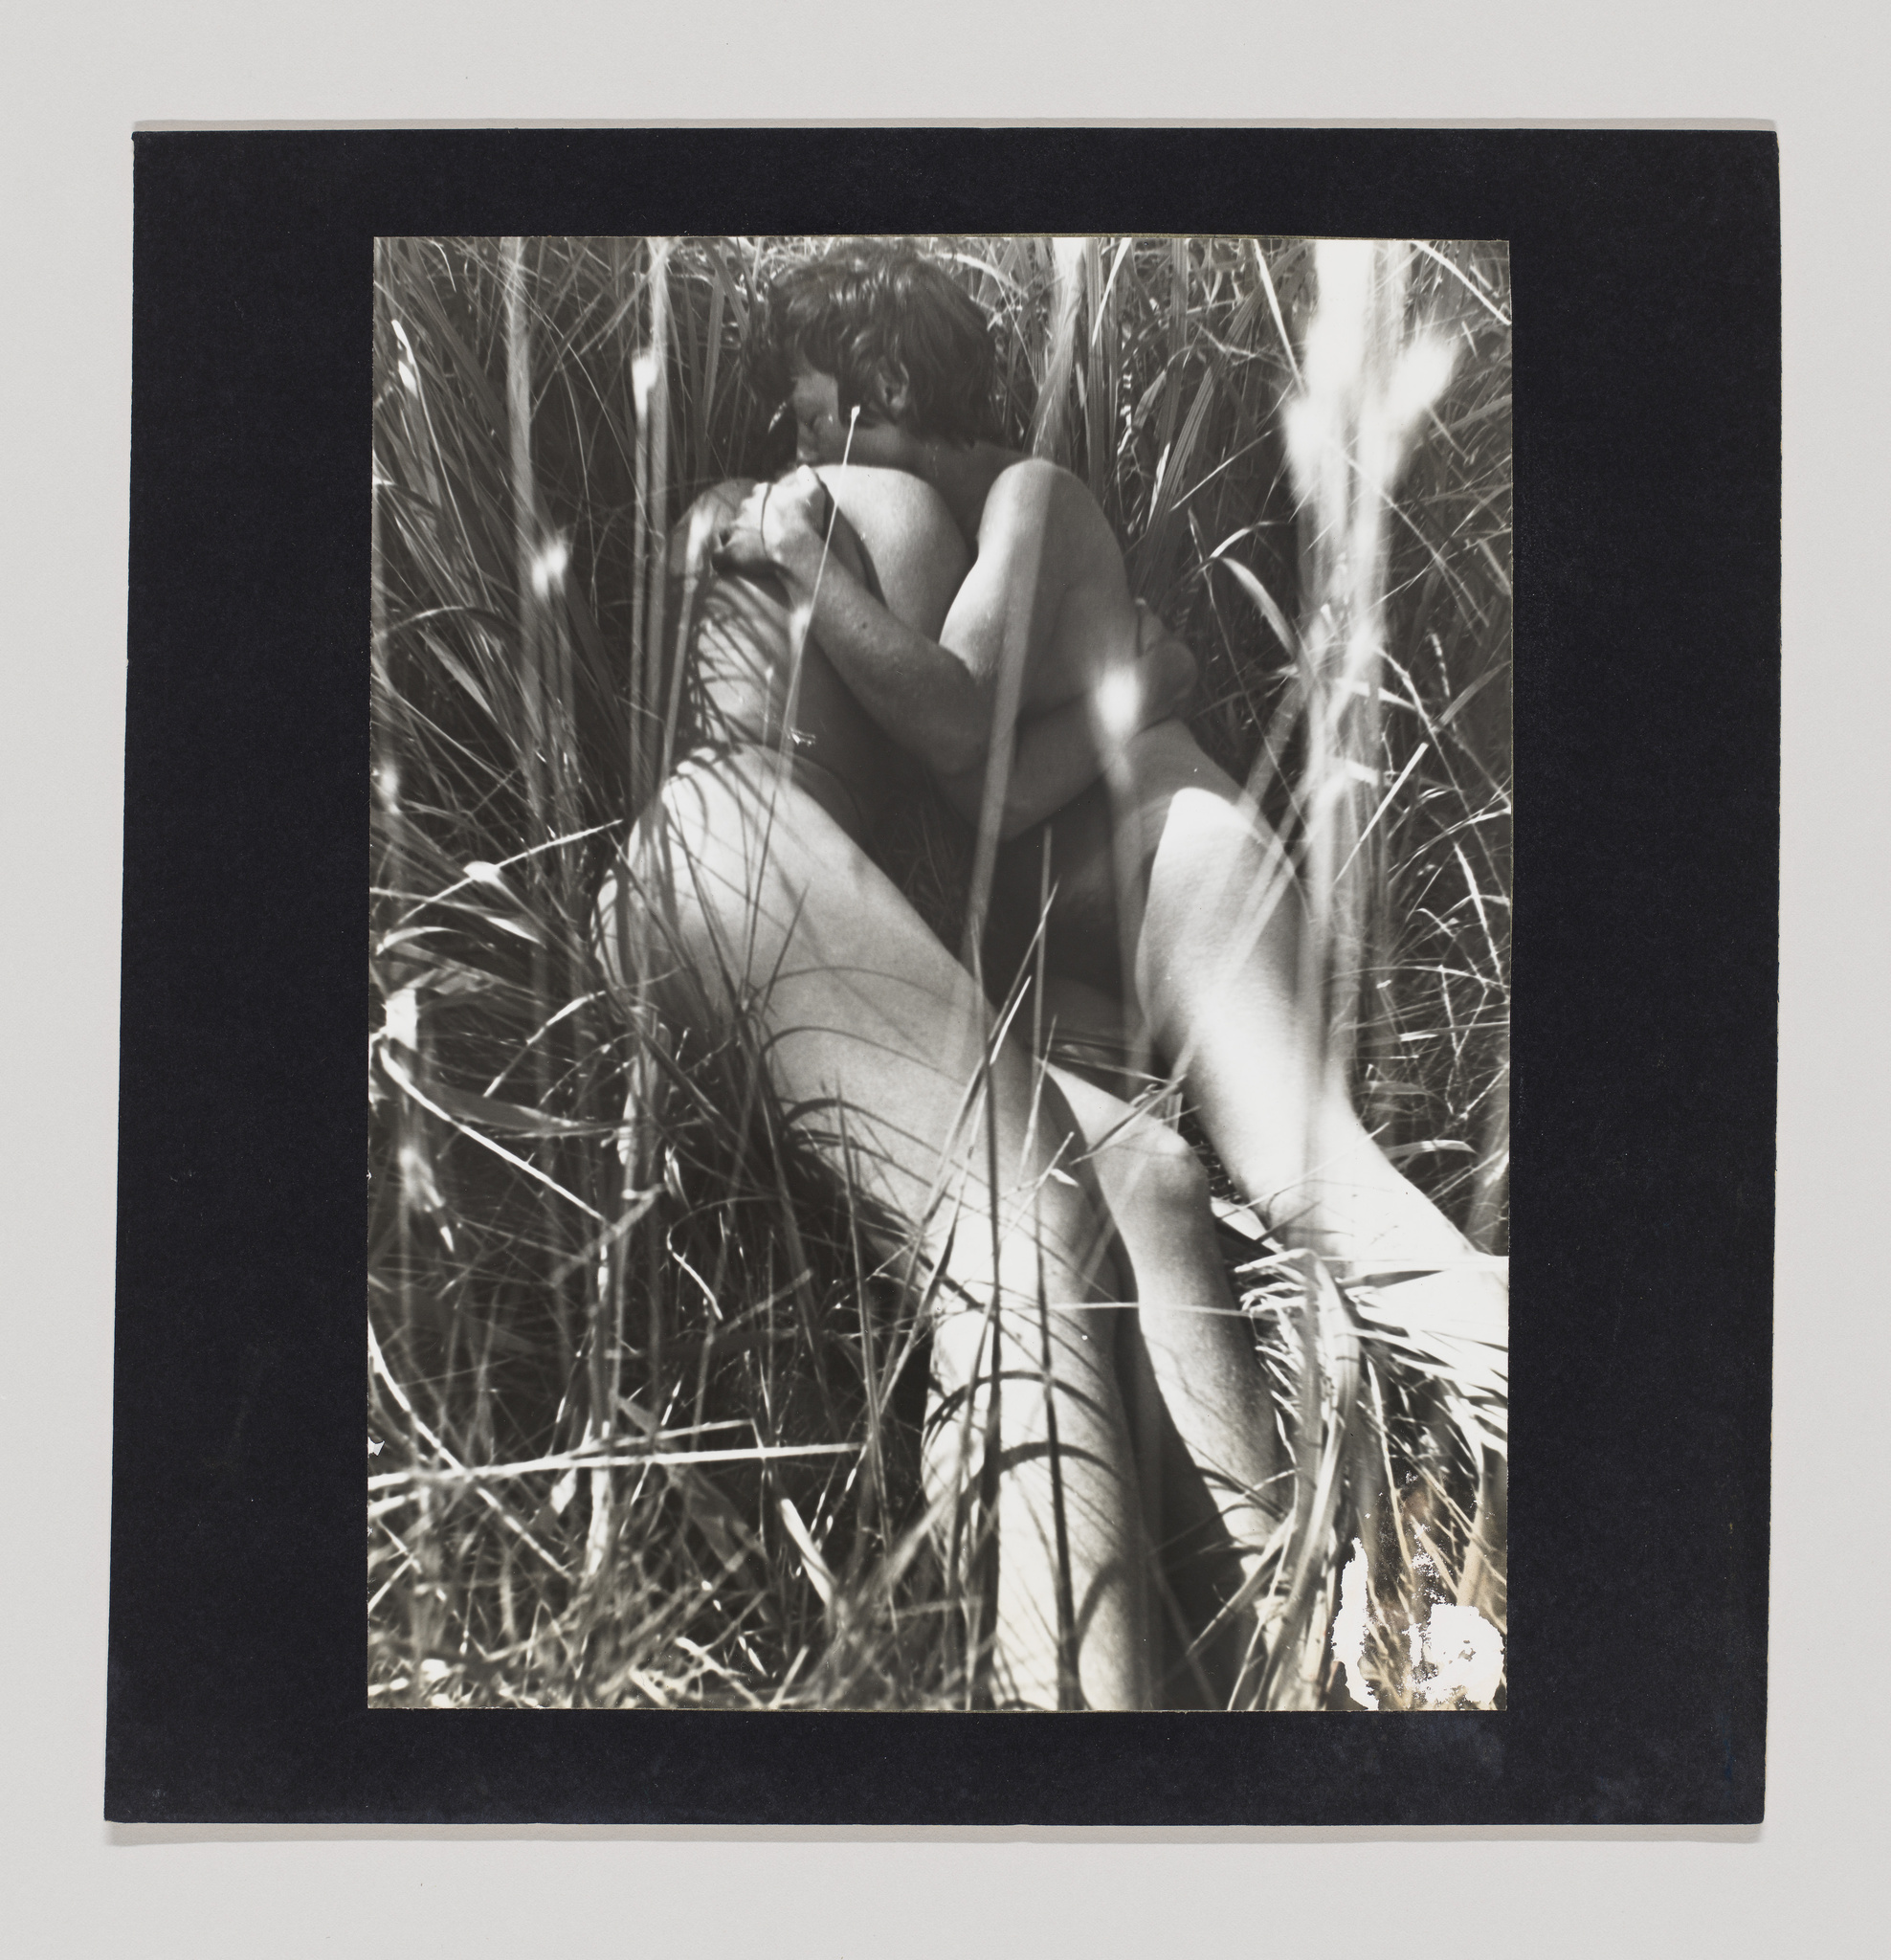 Two nude white women lie in tall grass embracing one another.